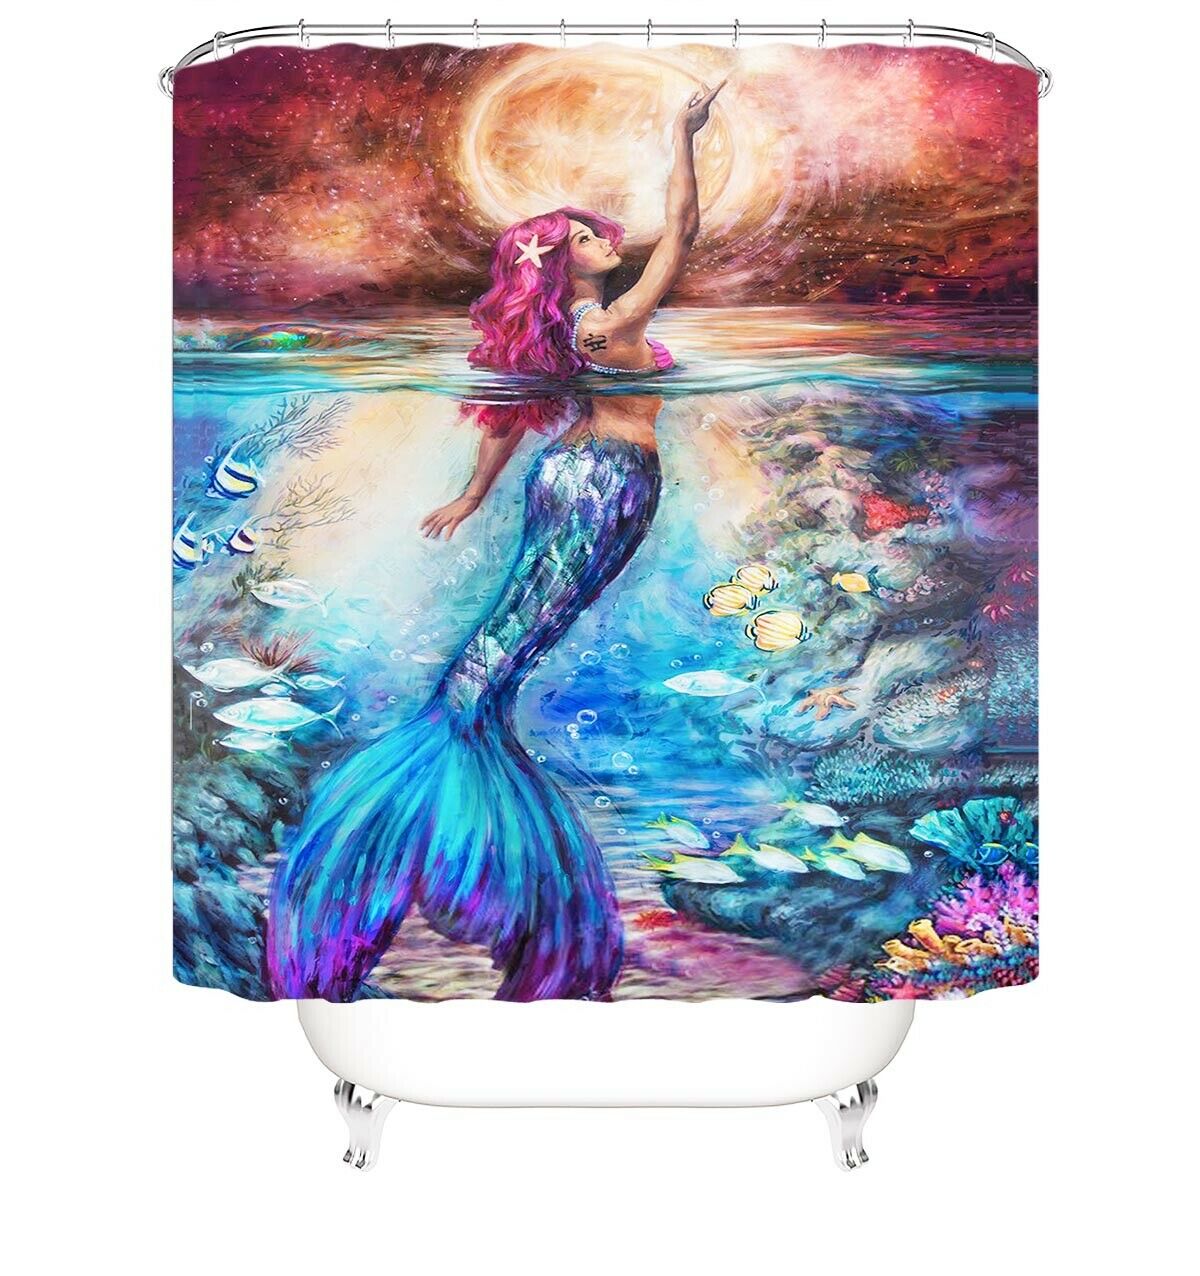 Mermaid Shower Curtain Bathroom Rug Set Bath Mat Non-Slip Toilet Lid Cover-180×180cm Shower Curtain Only-Free Shipping at meselling99